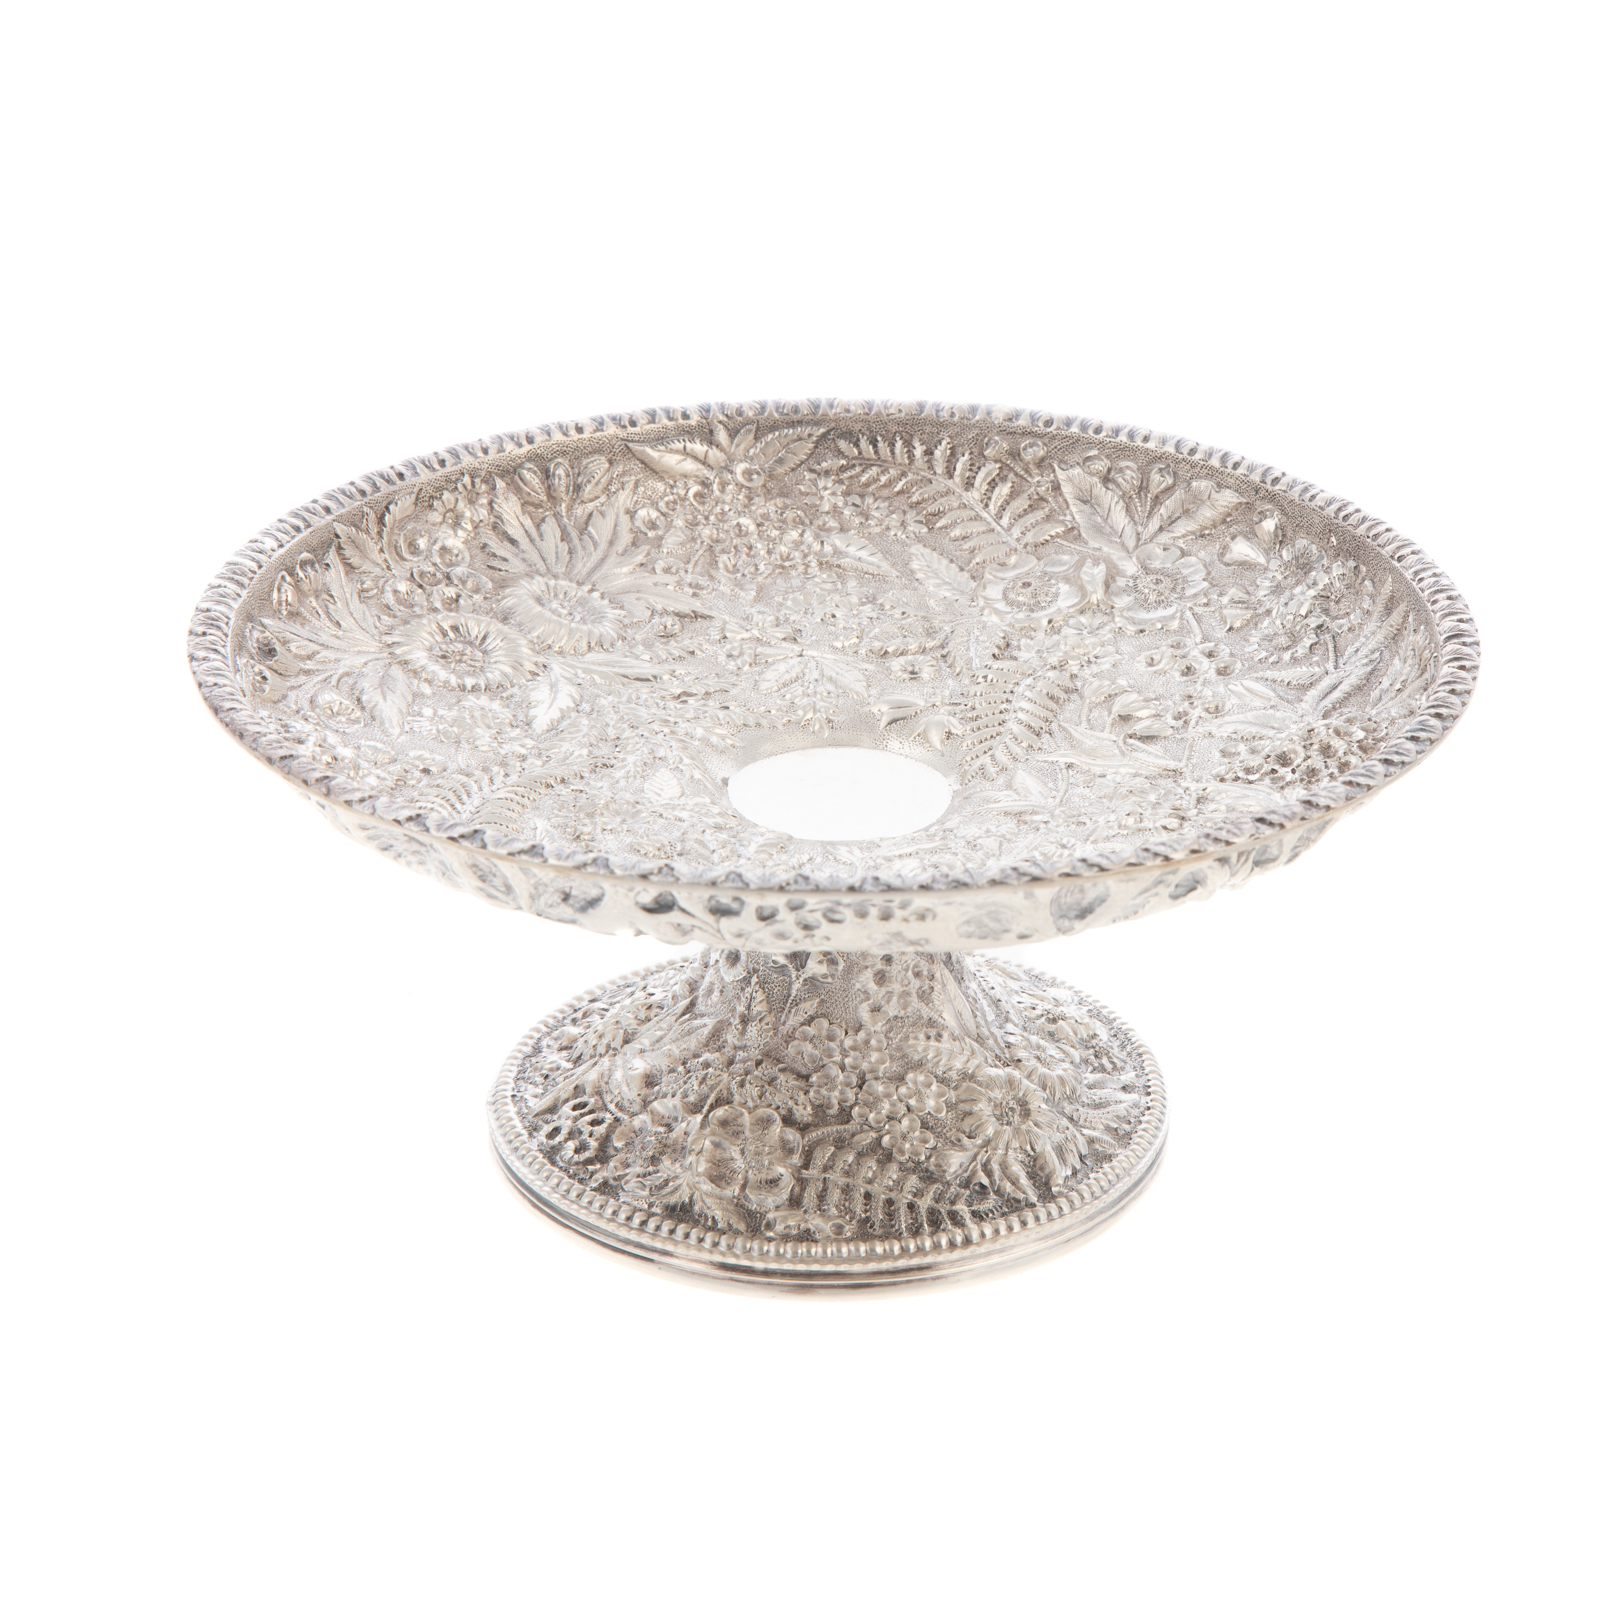 S KIRK & SON SILVER REPOUSSE COMPOTE